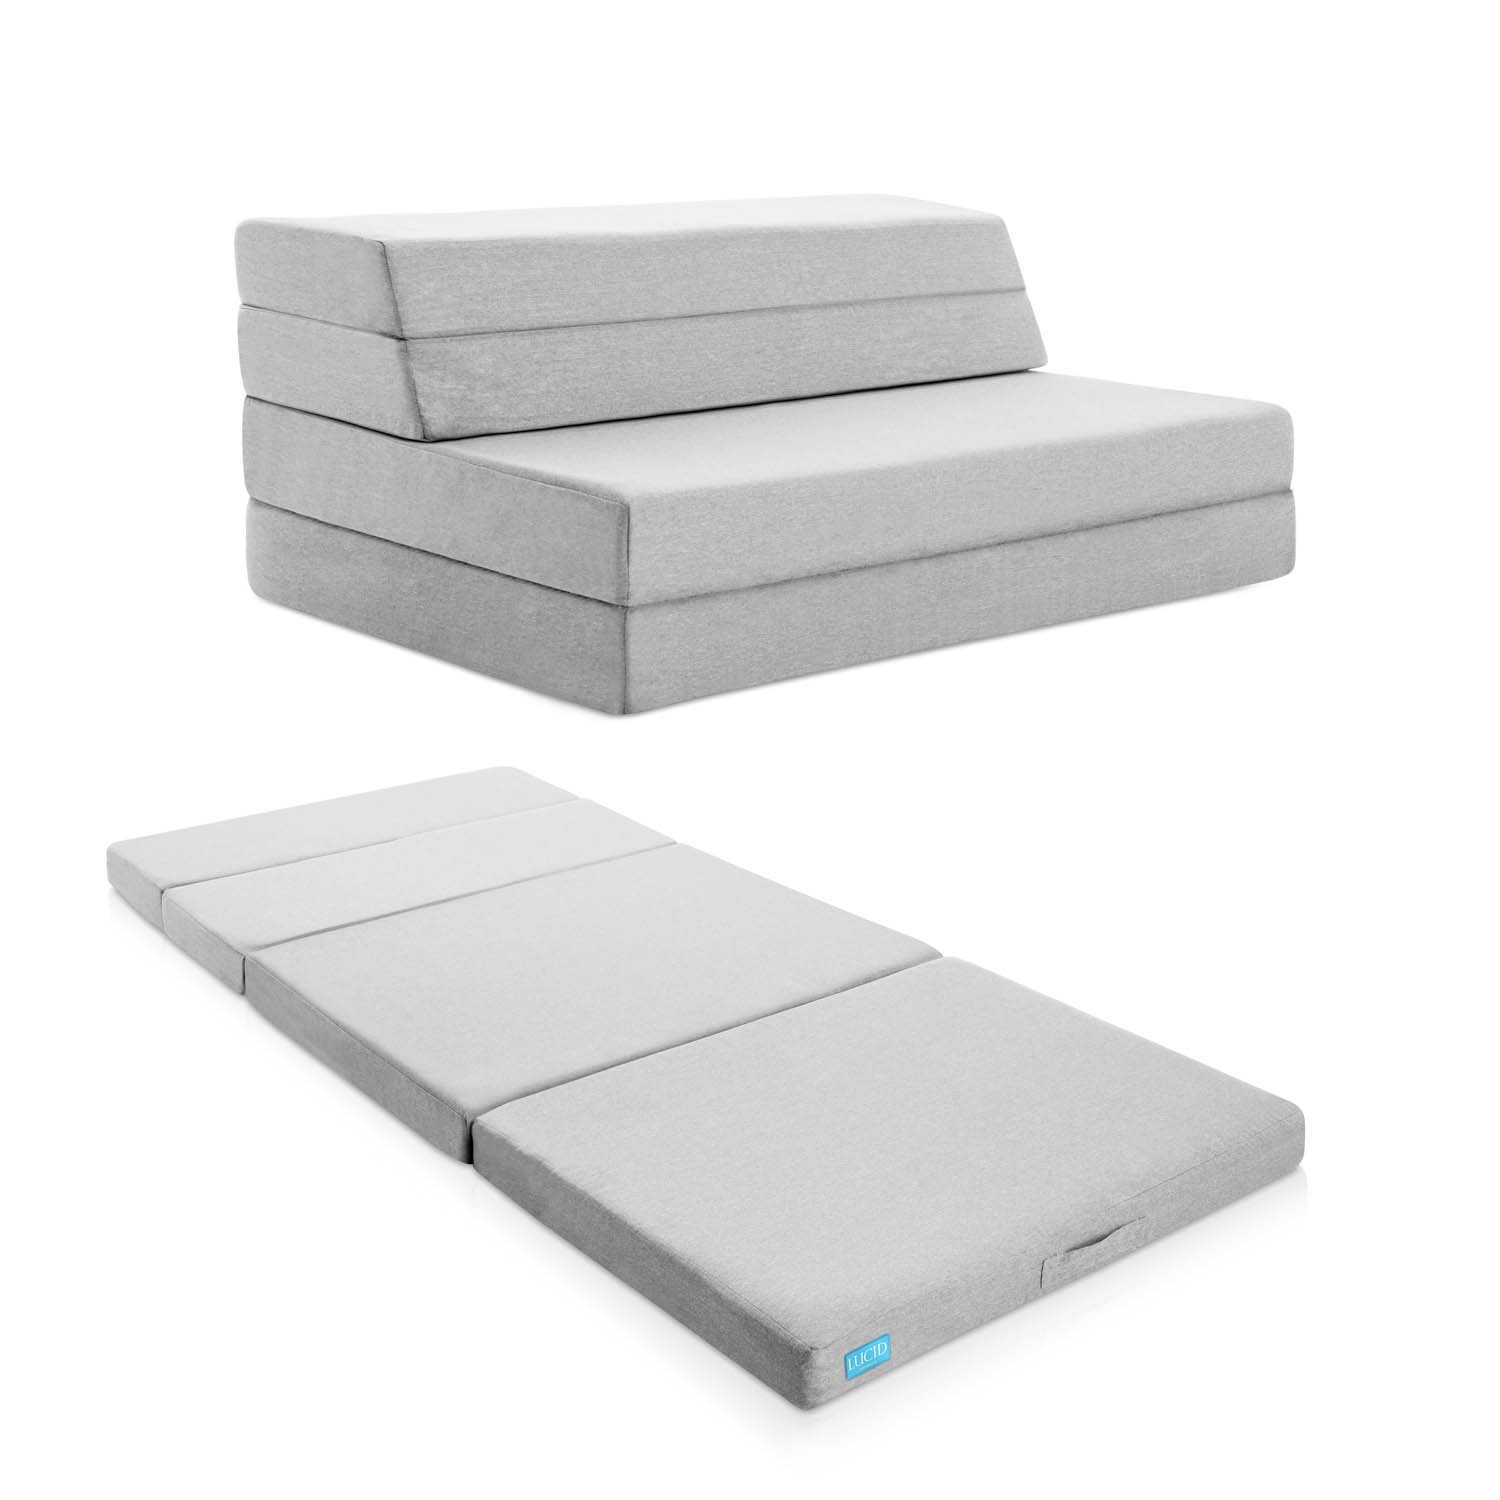 LUCID 4 Inch Folding Mattress and Sofa with Removable Indoor / Outdoor Fabric Cover - Twin Size